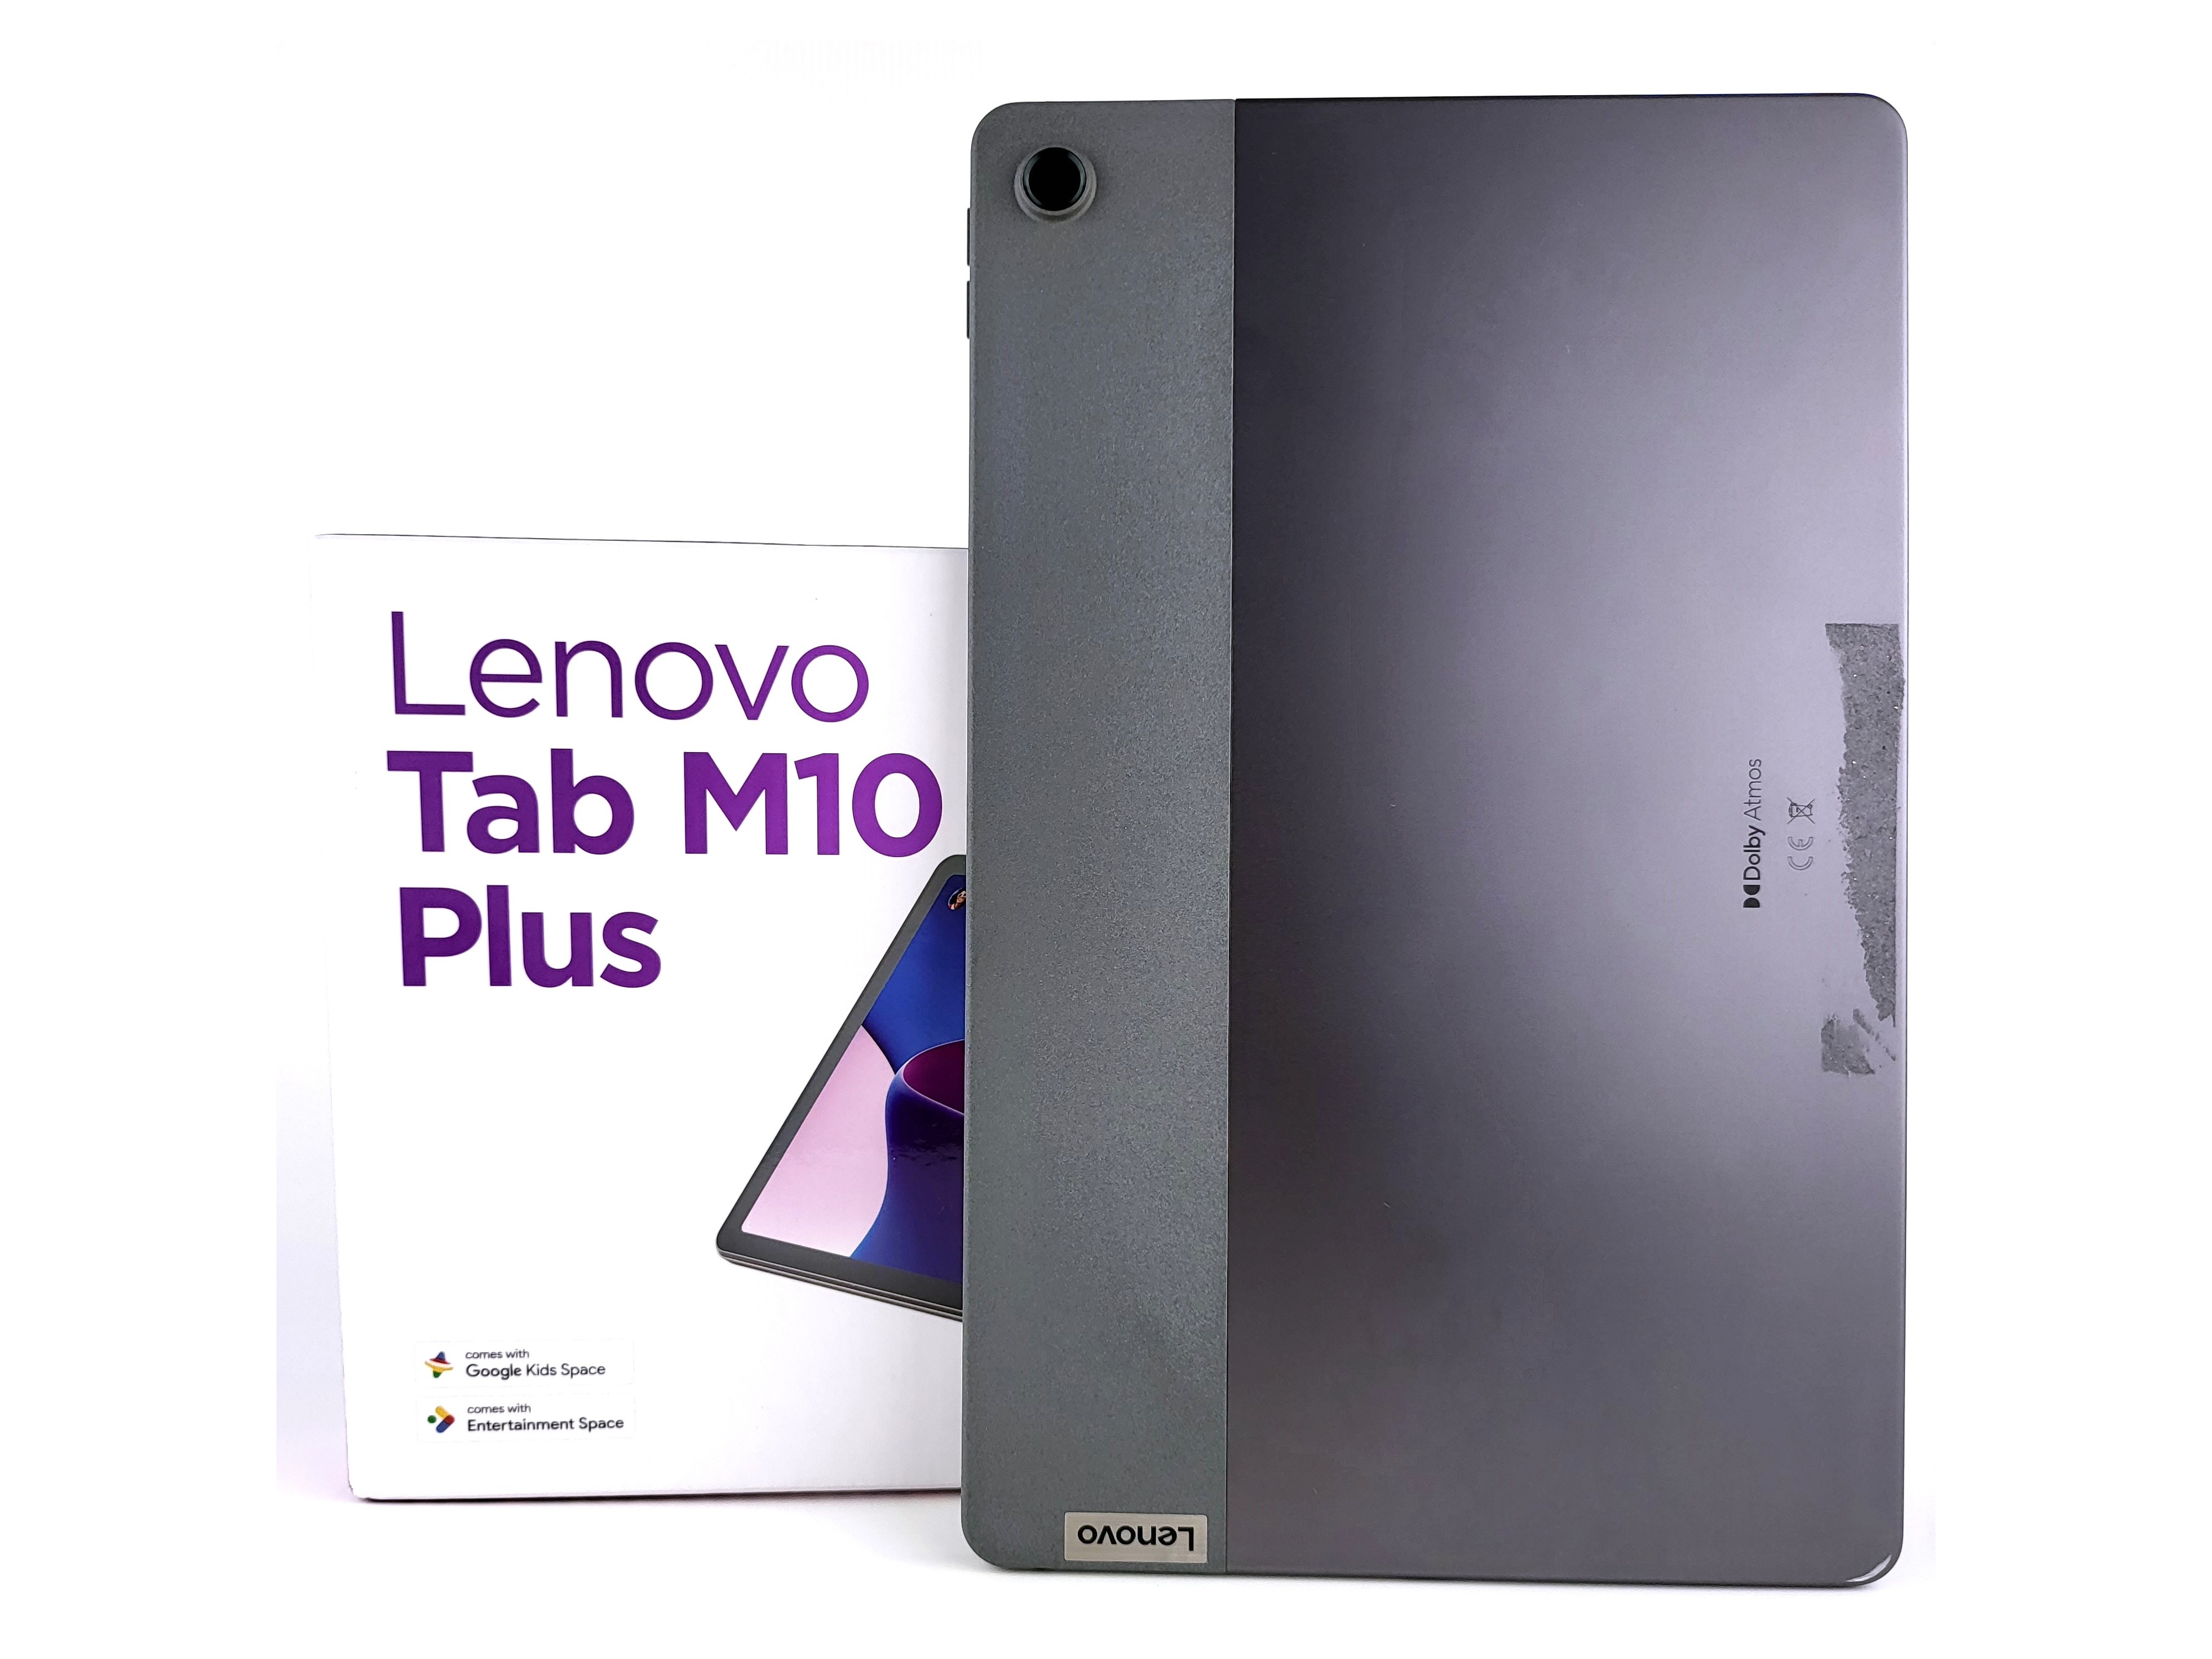 Lenovo Tab M10 Plus Gen 3 review verdict: Multimedia is the main focus of  the affordable tablet - NotebookCheck.net Reviews